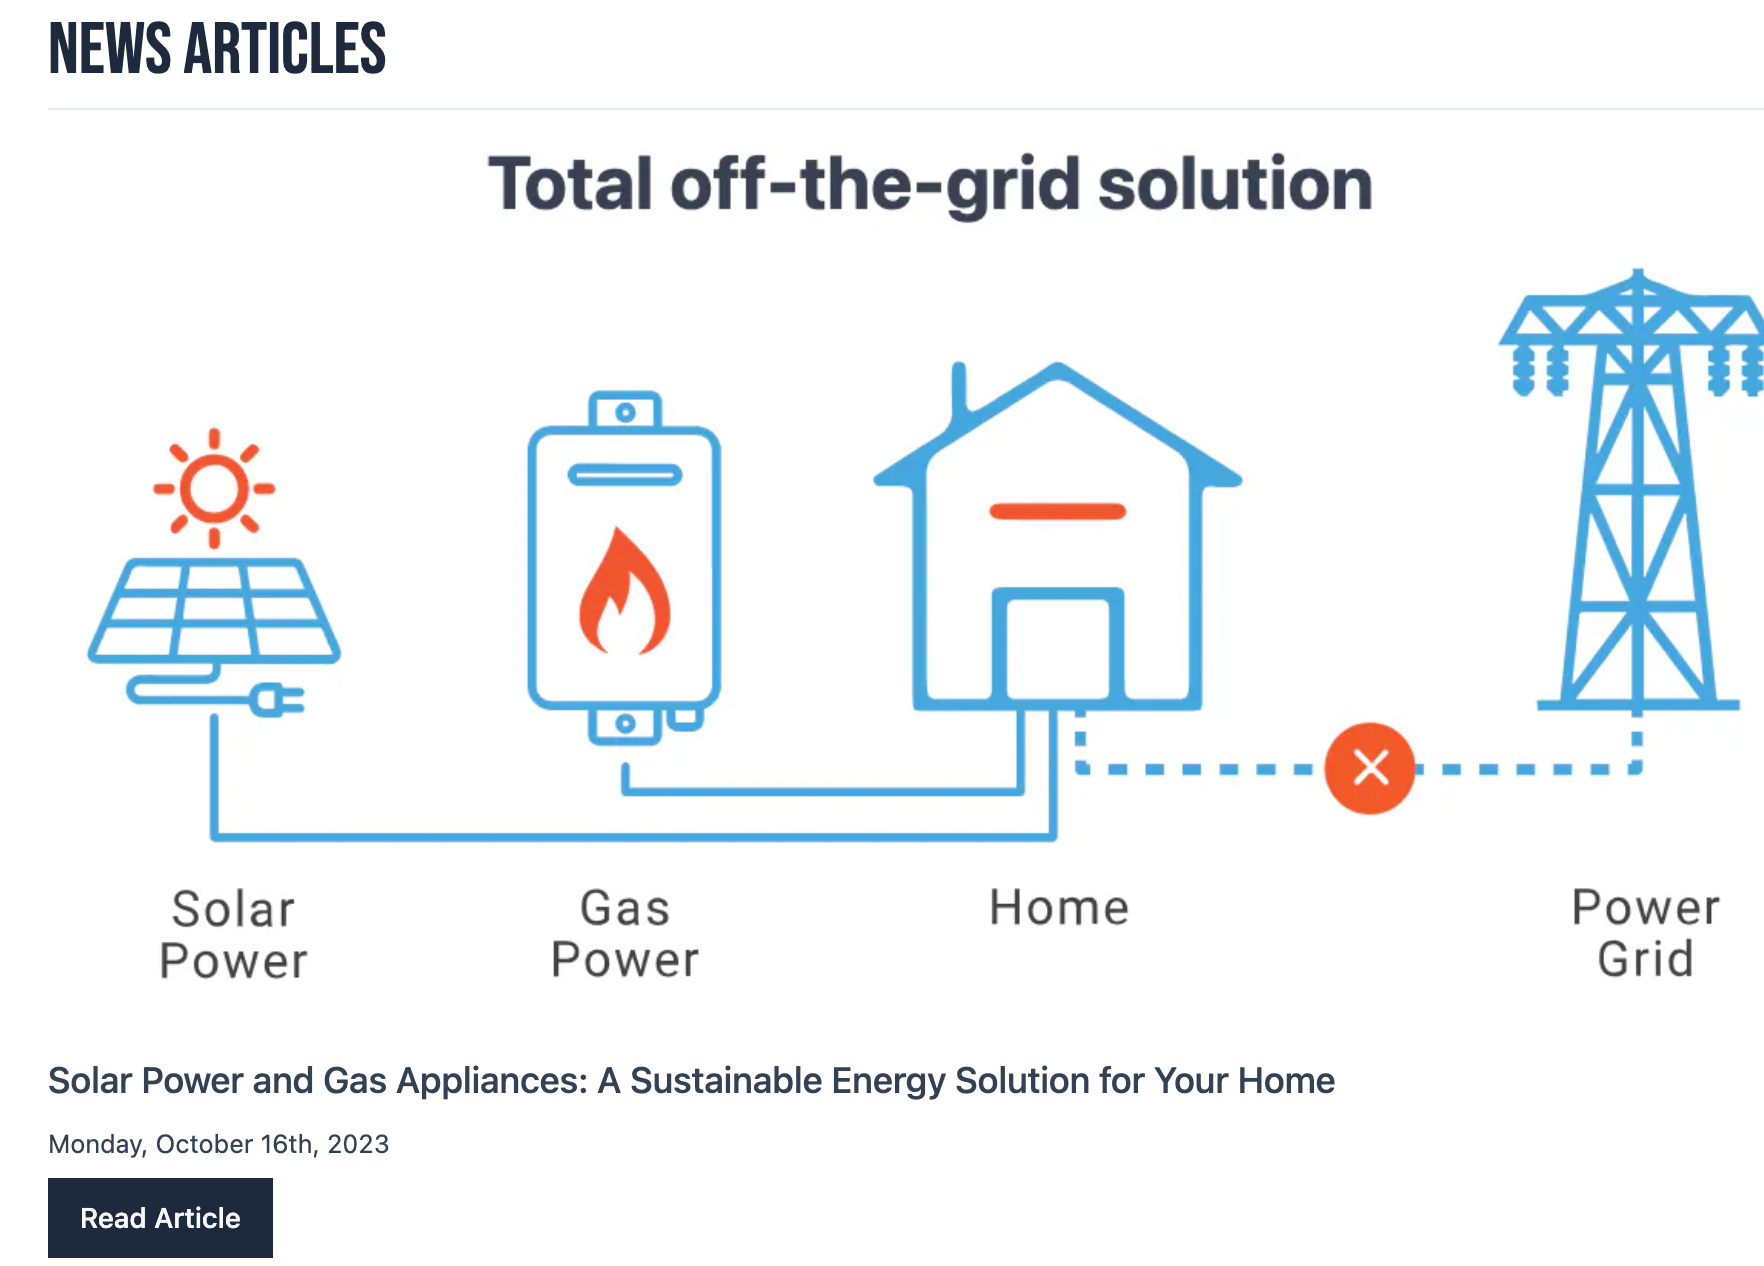 Solar Power and Gas Appliances: A Sustainable Energy Solution for Your Home